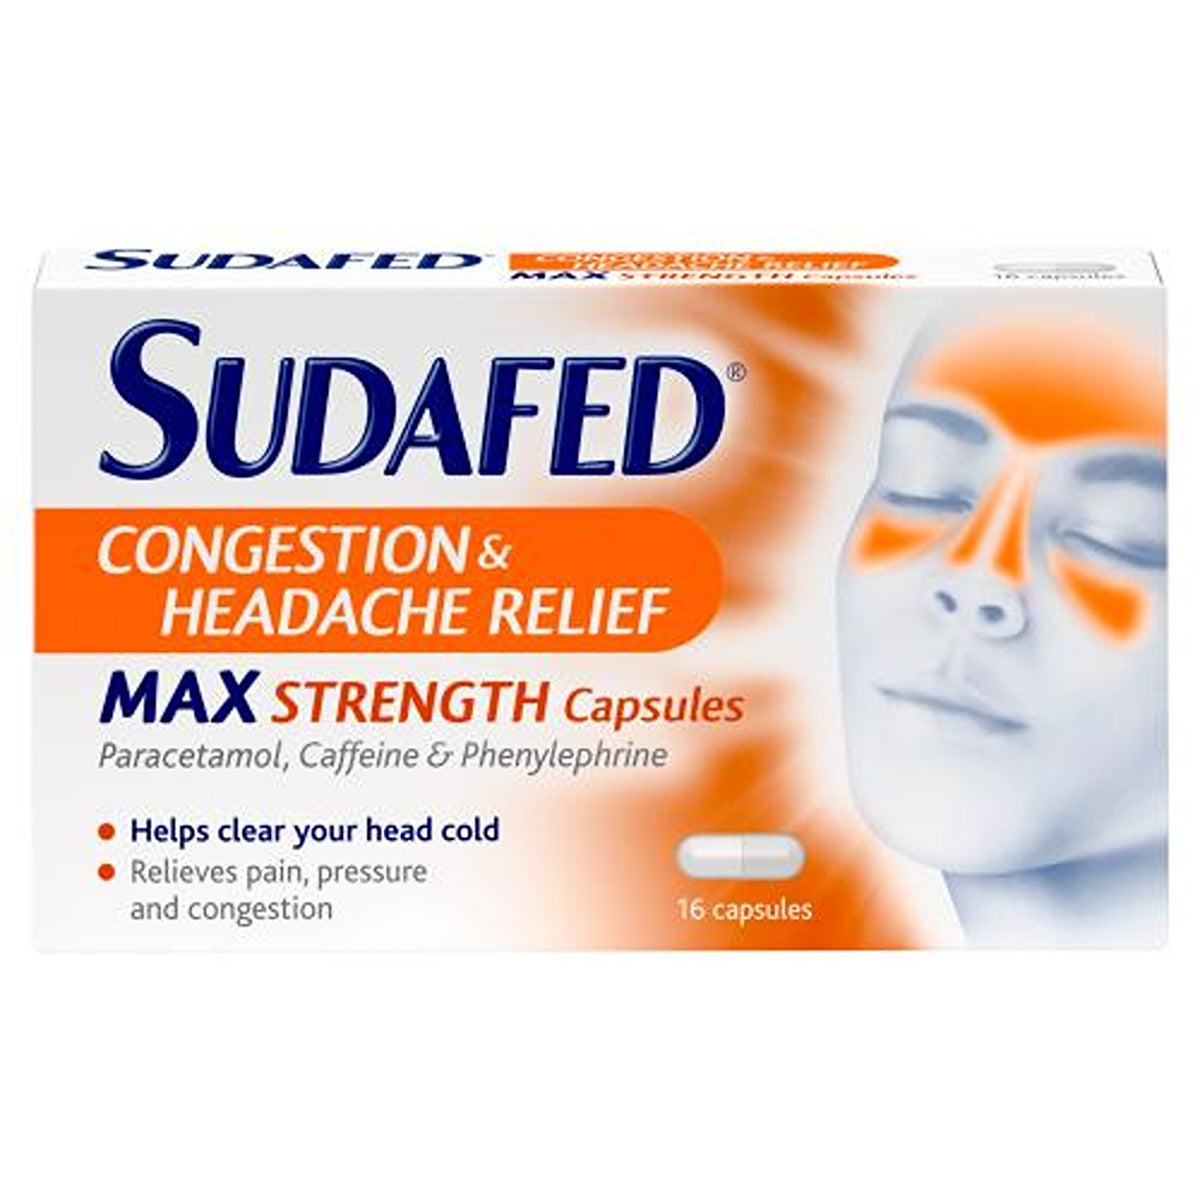 Sudafed - Congestion & Headache Relief Max Strength - 16 Pills - Continental Food Store